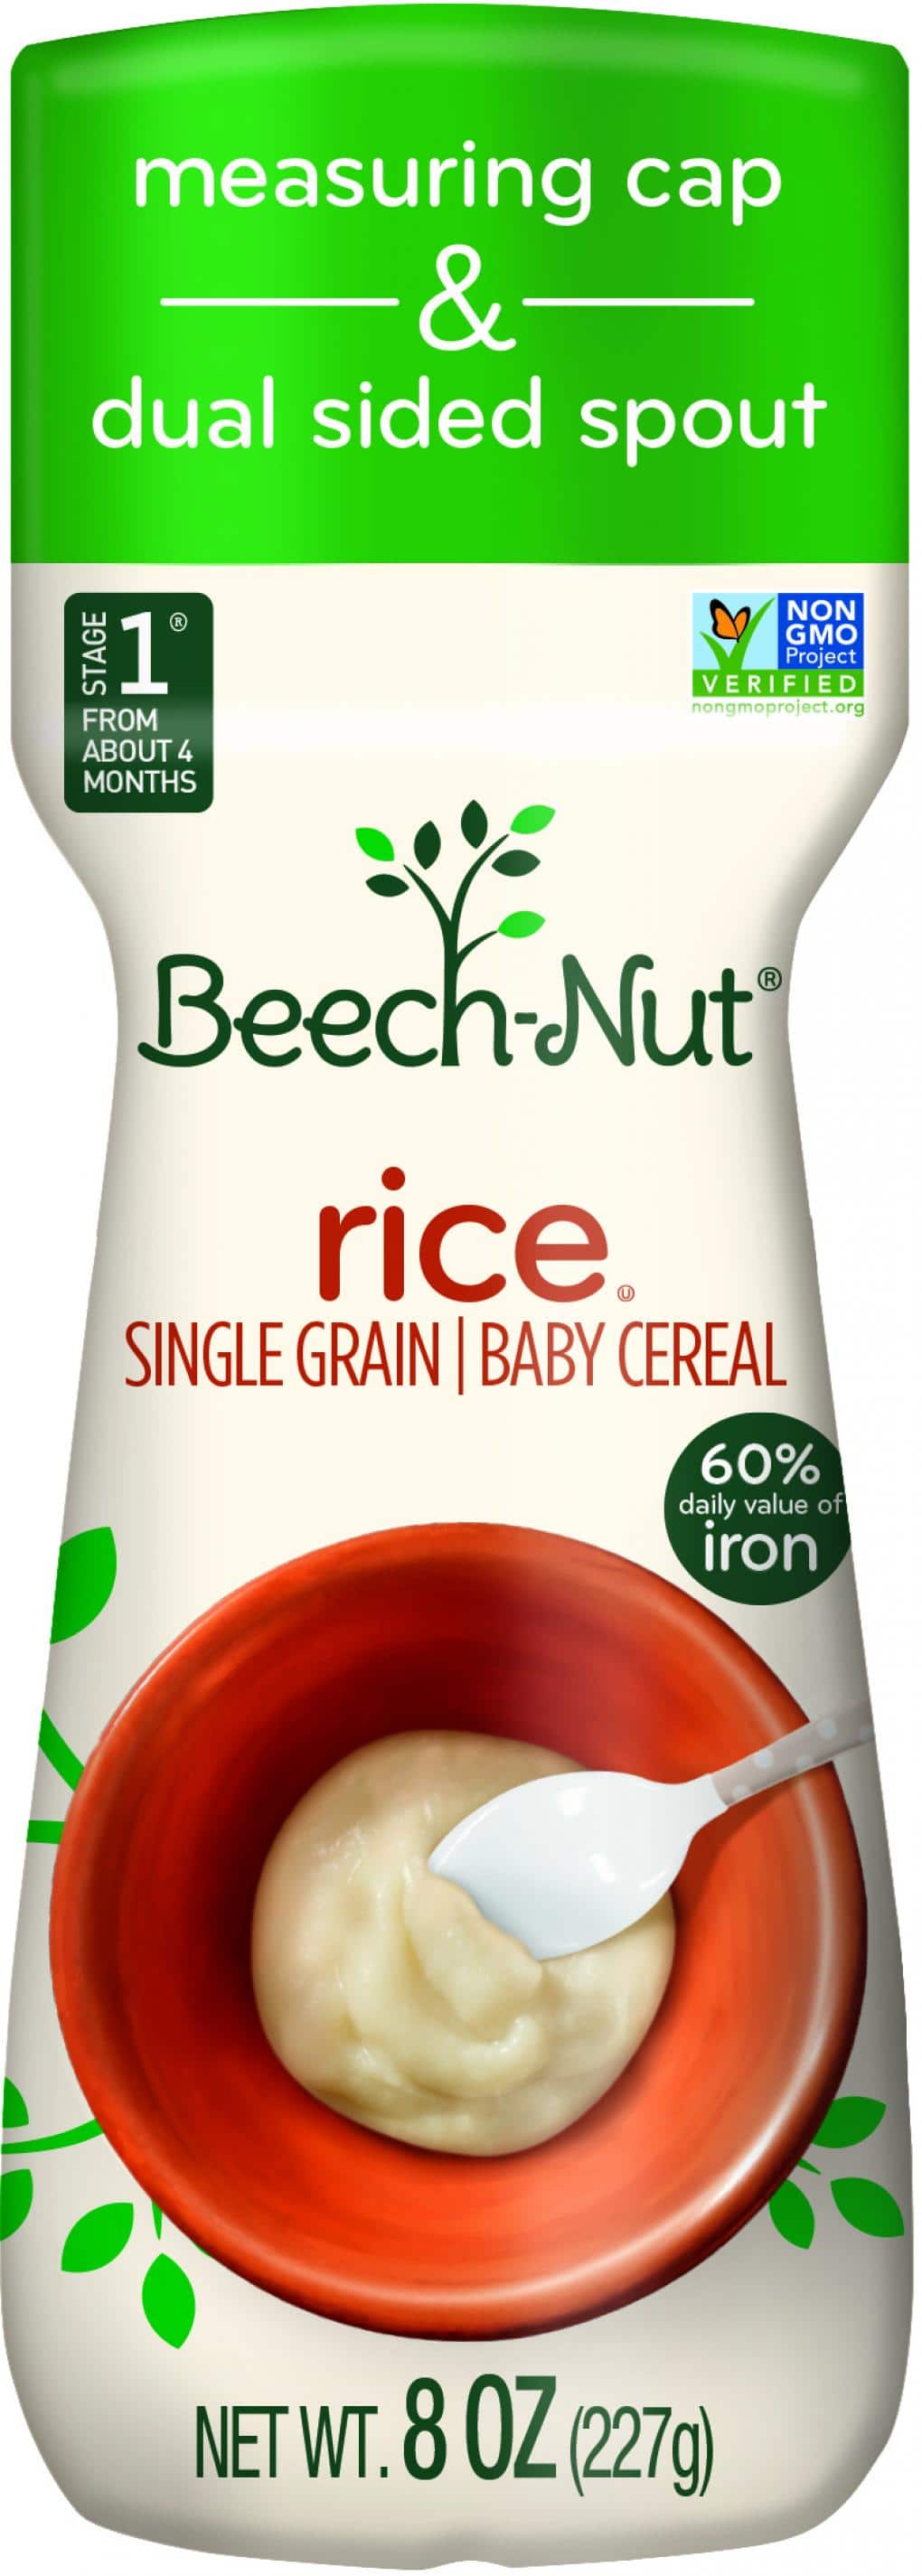 Baby Rice Cereal Recalled for High Levels of Toxic Arsenic